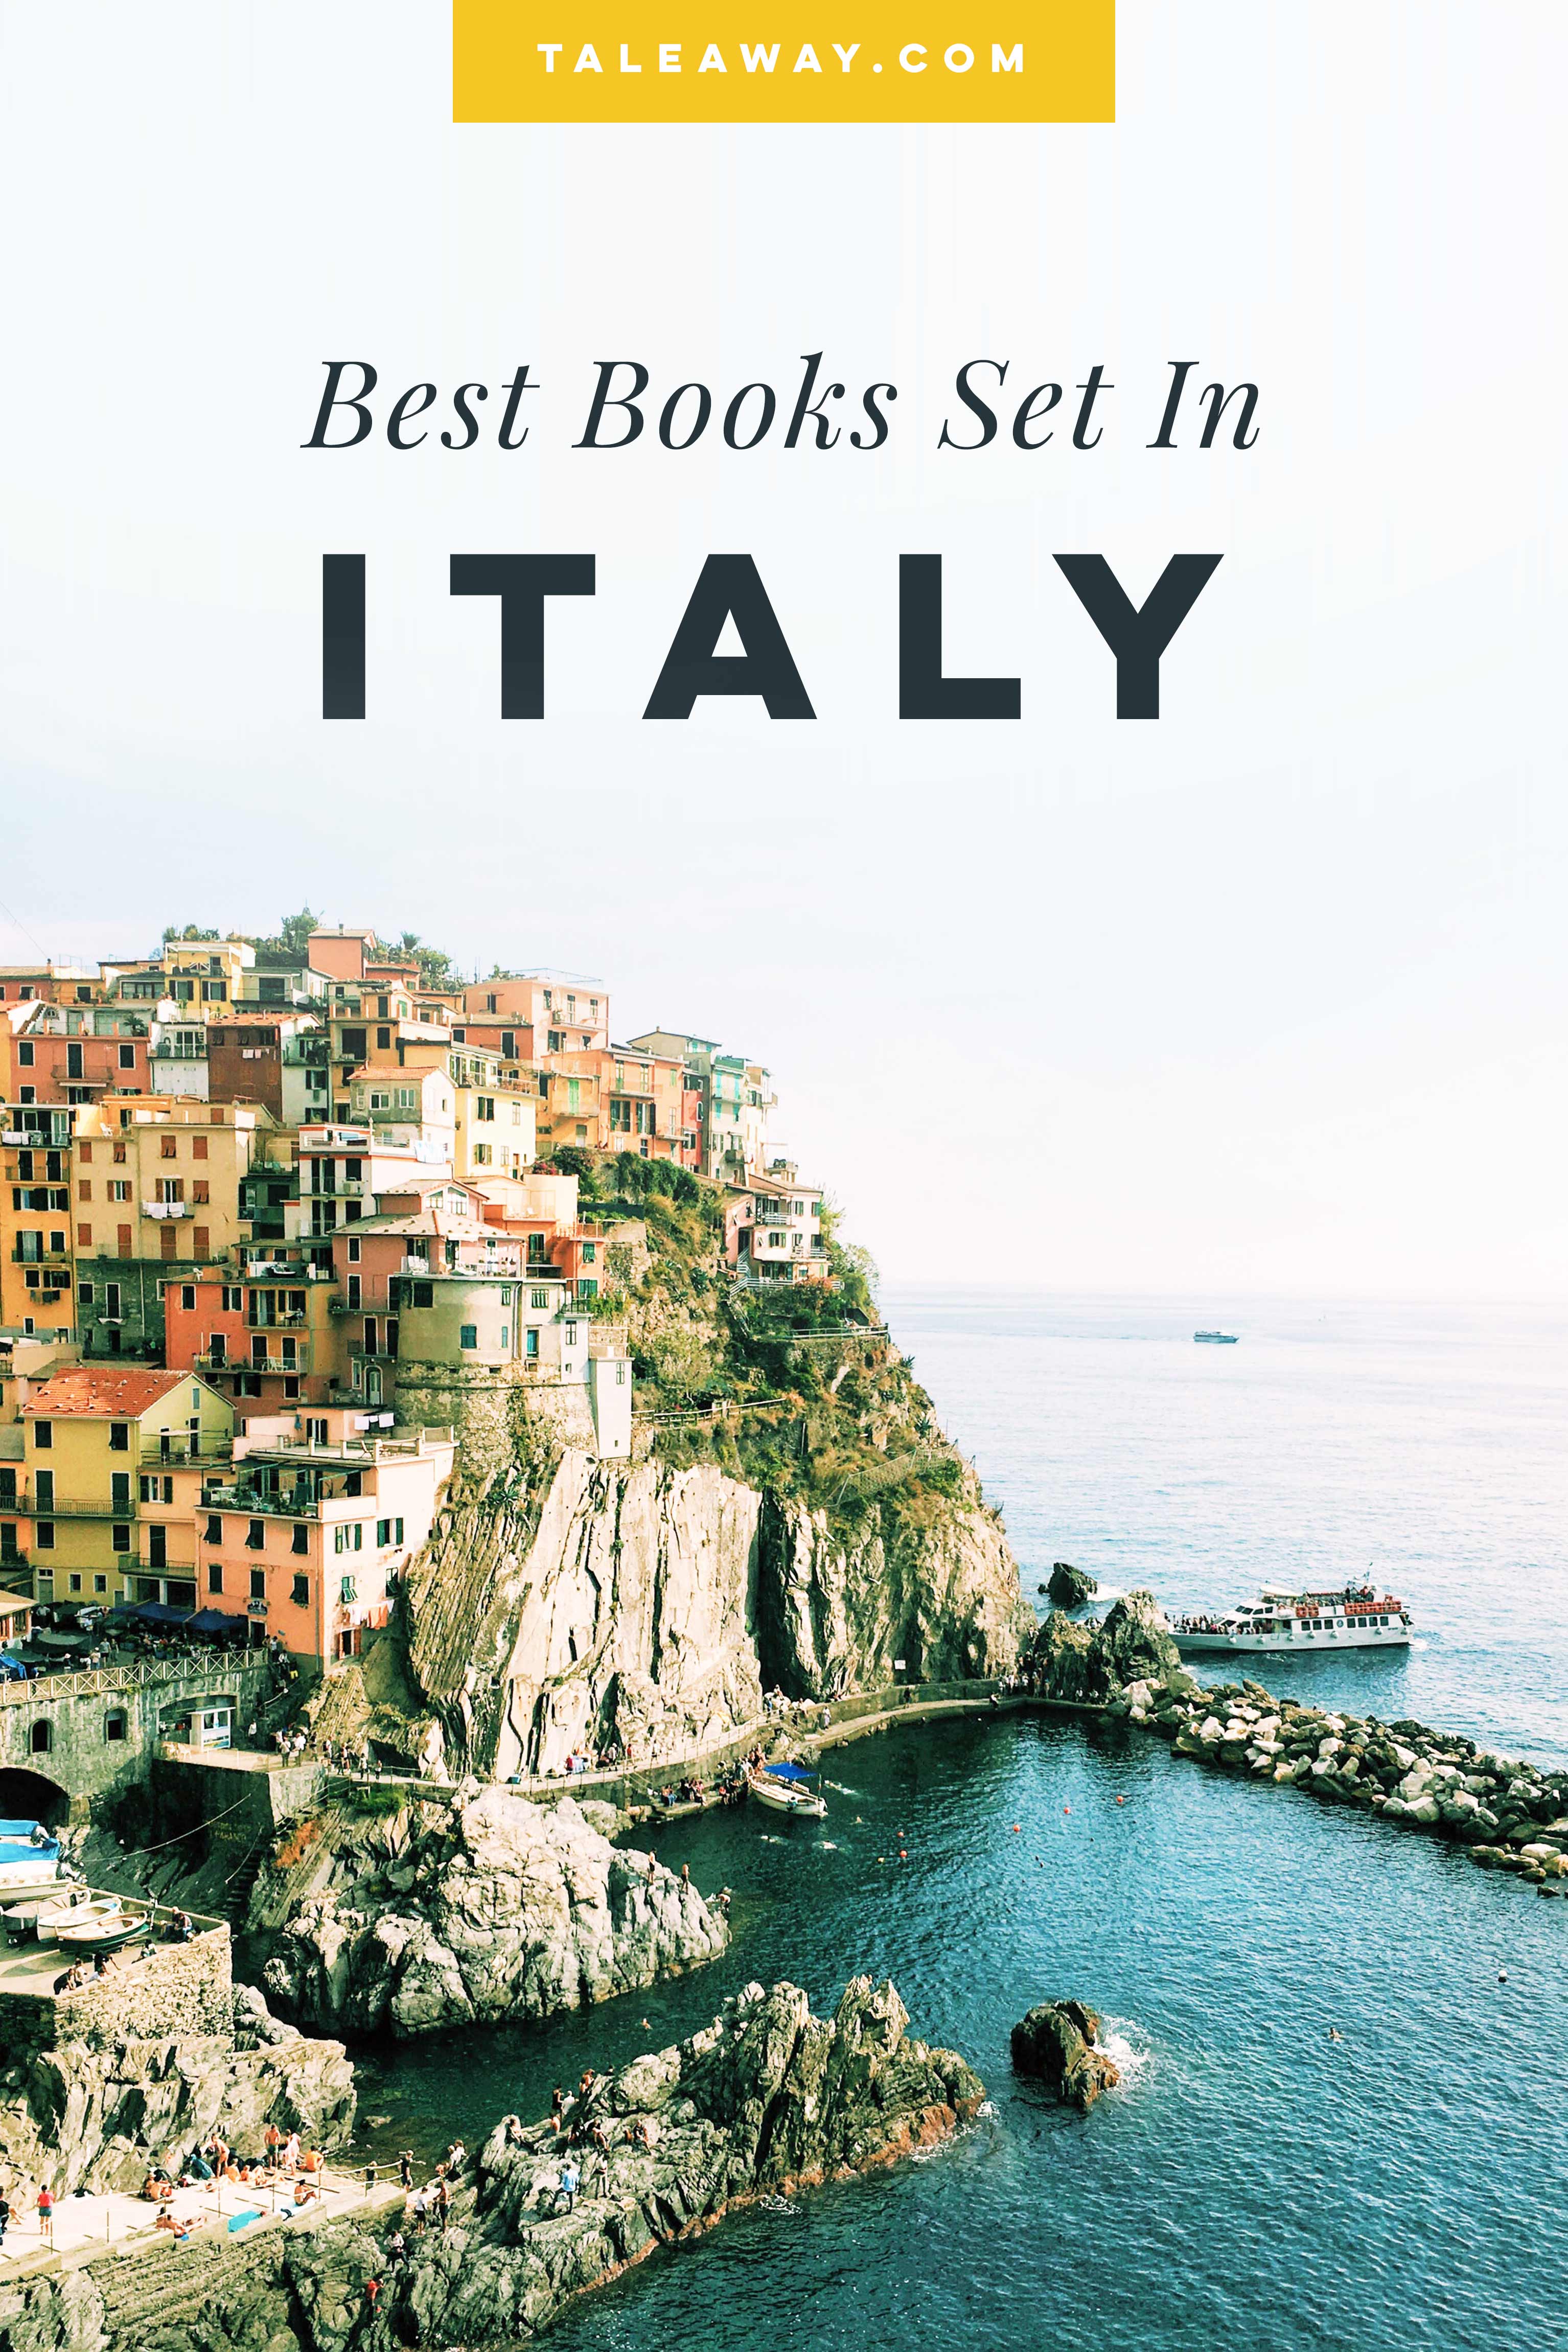 Books Set In Italy. Italian books that inspire travel, visit www.taleway.com for books set around the world. italian books, books about italy, italy inspiration, italy travel, novels set in italy, italian novels, books and travel, travel reads, reading list, books around the world, books to read, italy, books set in different countries